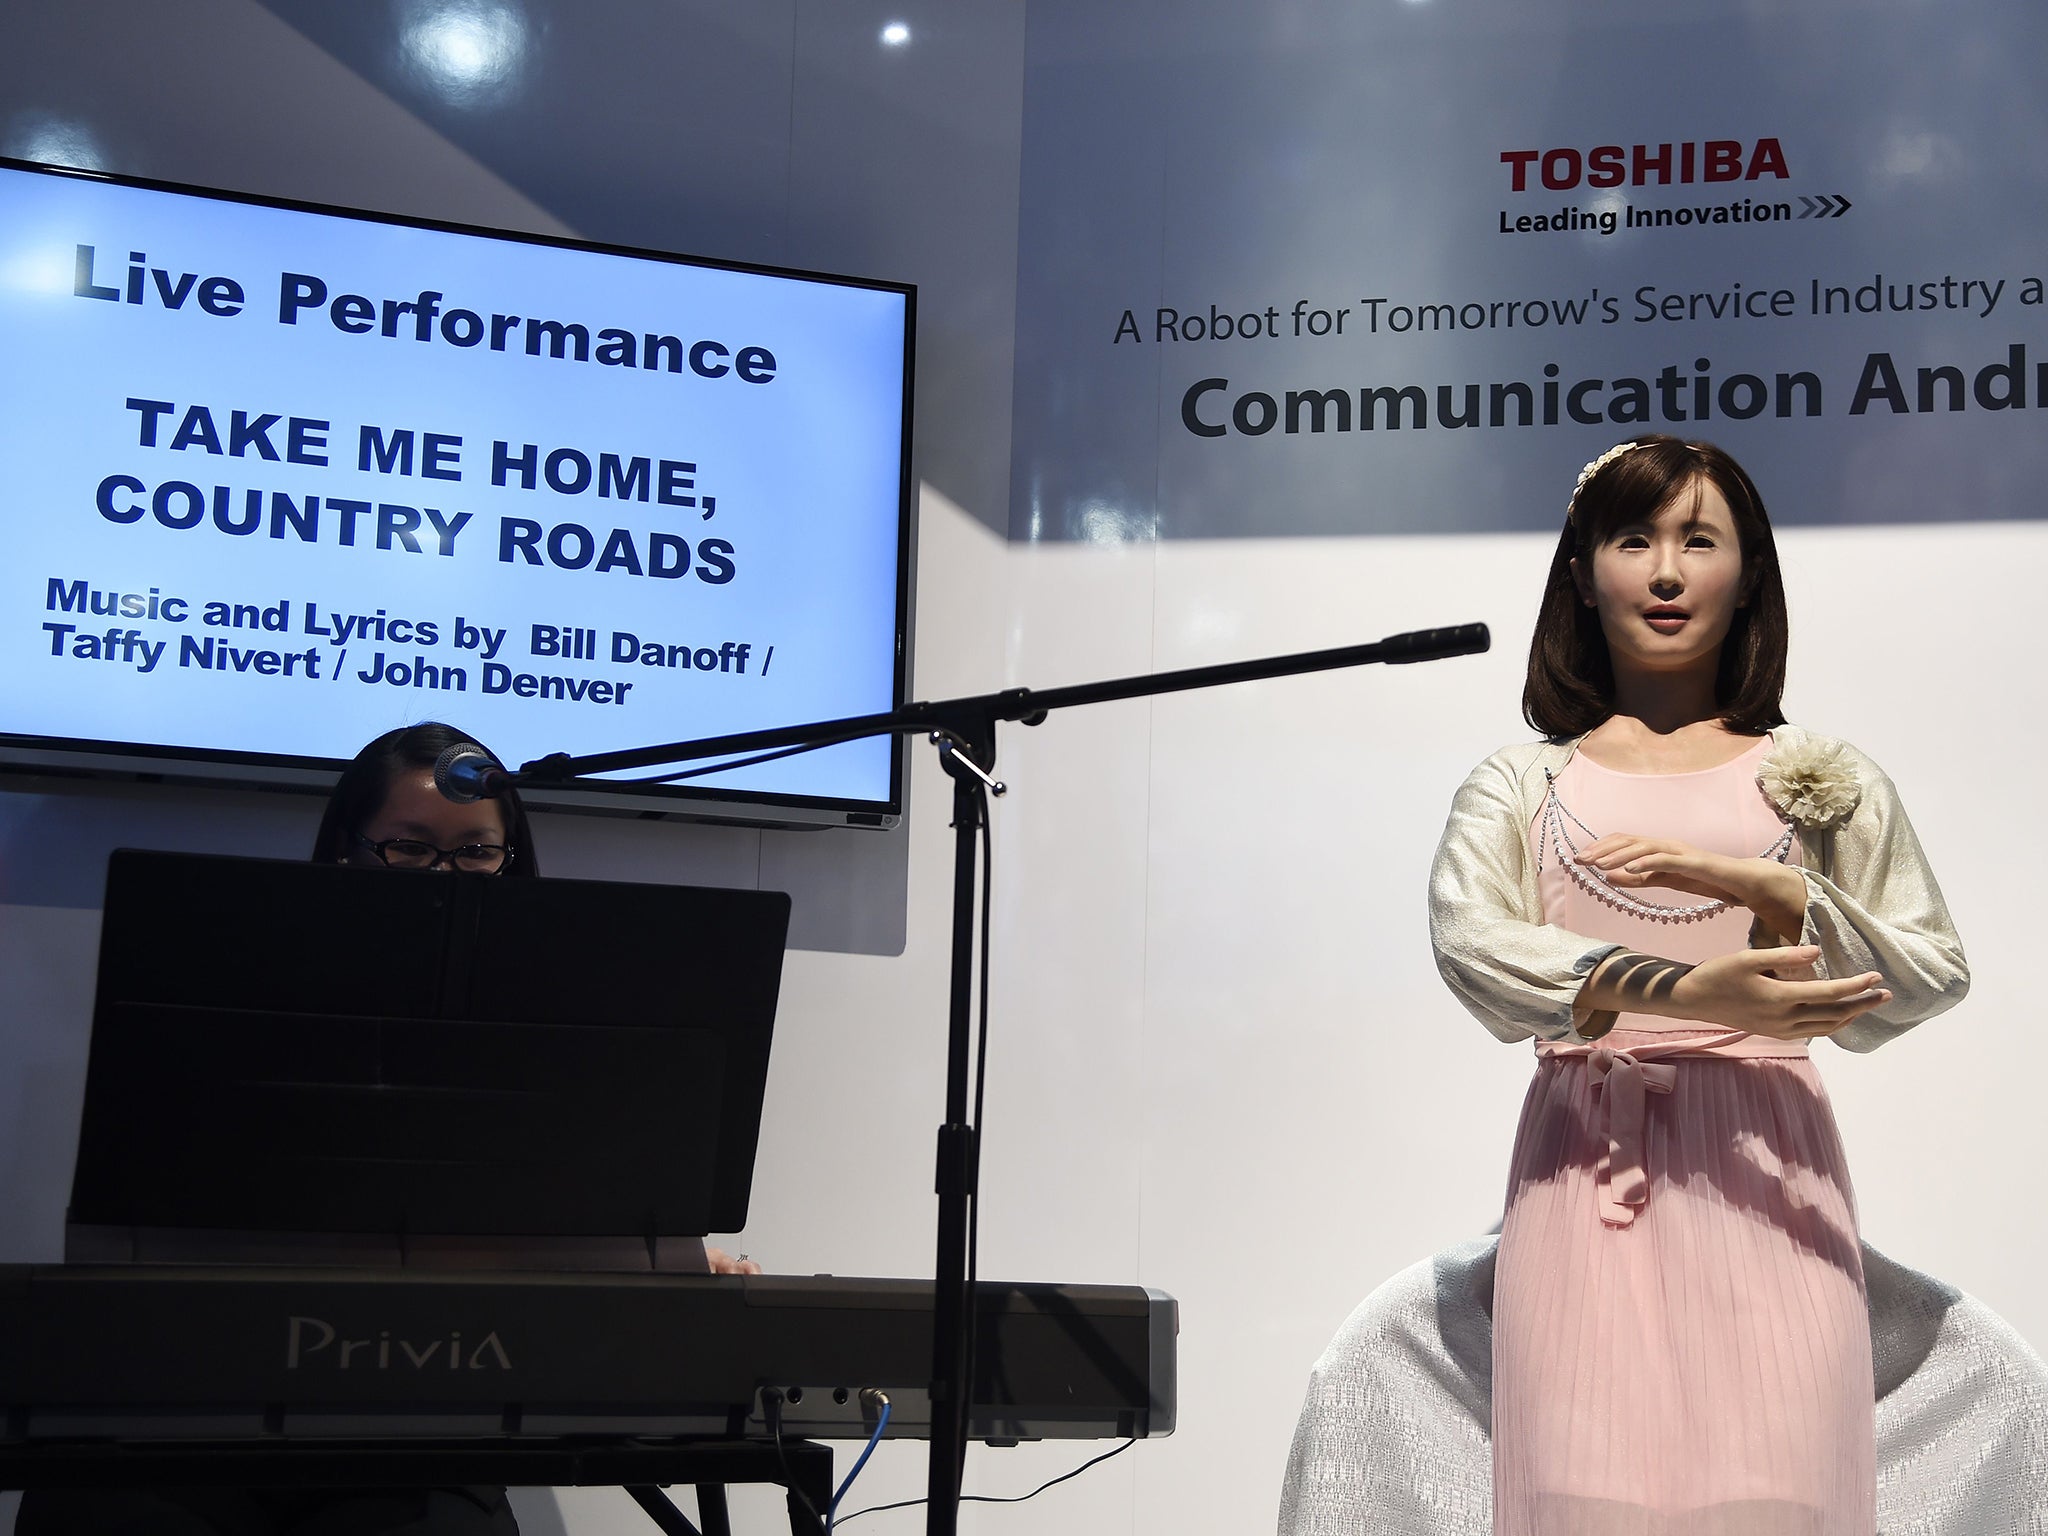 ChihiraAico, Toshiba’s Communication Android at the CES in Las Vegas